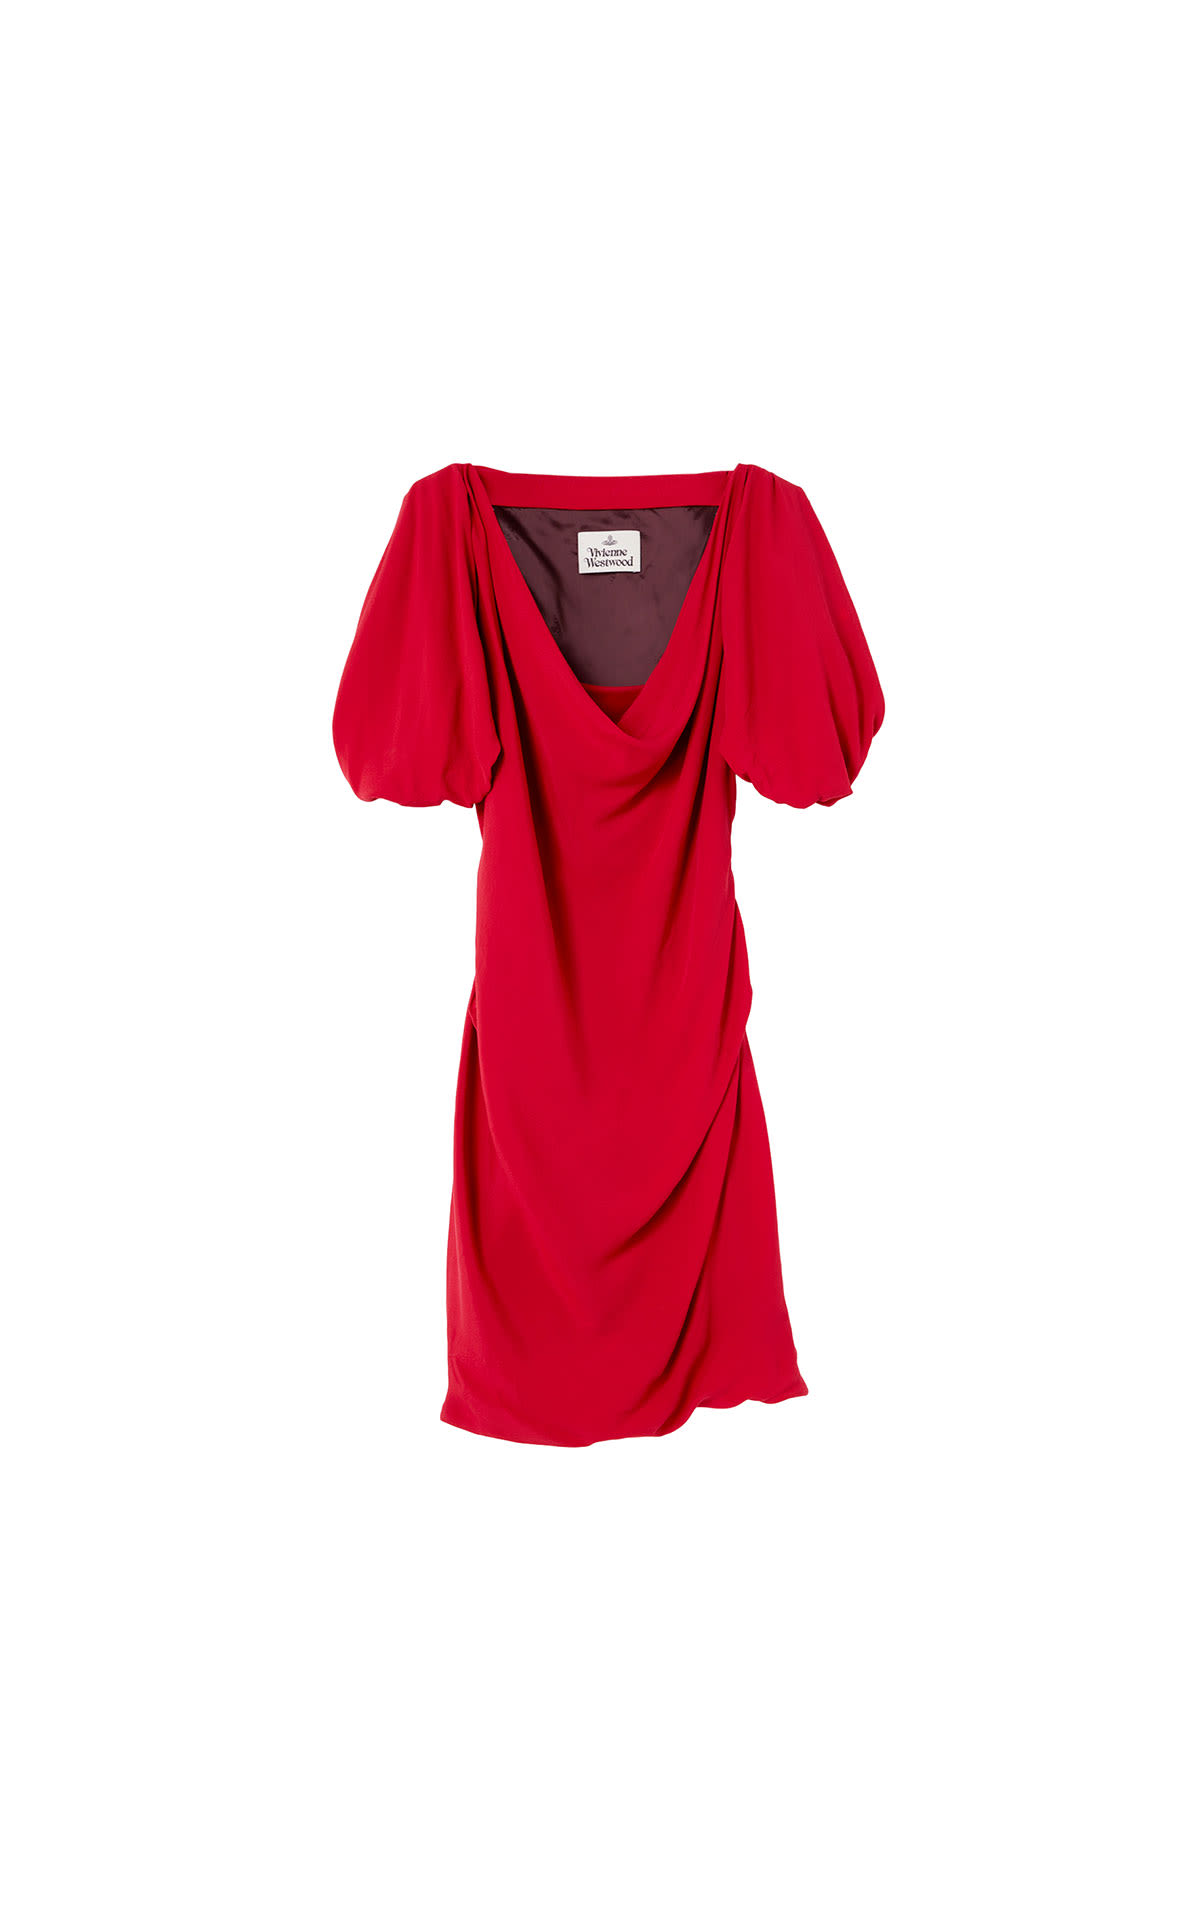 Vivienne Westwood New virginia mini dress red from Bicester Village